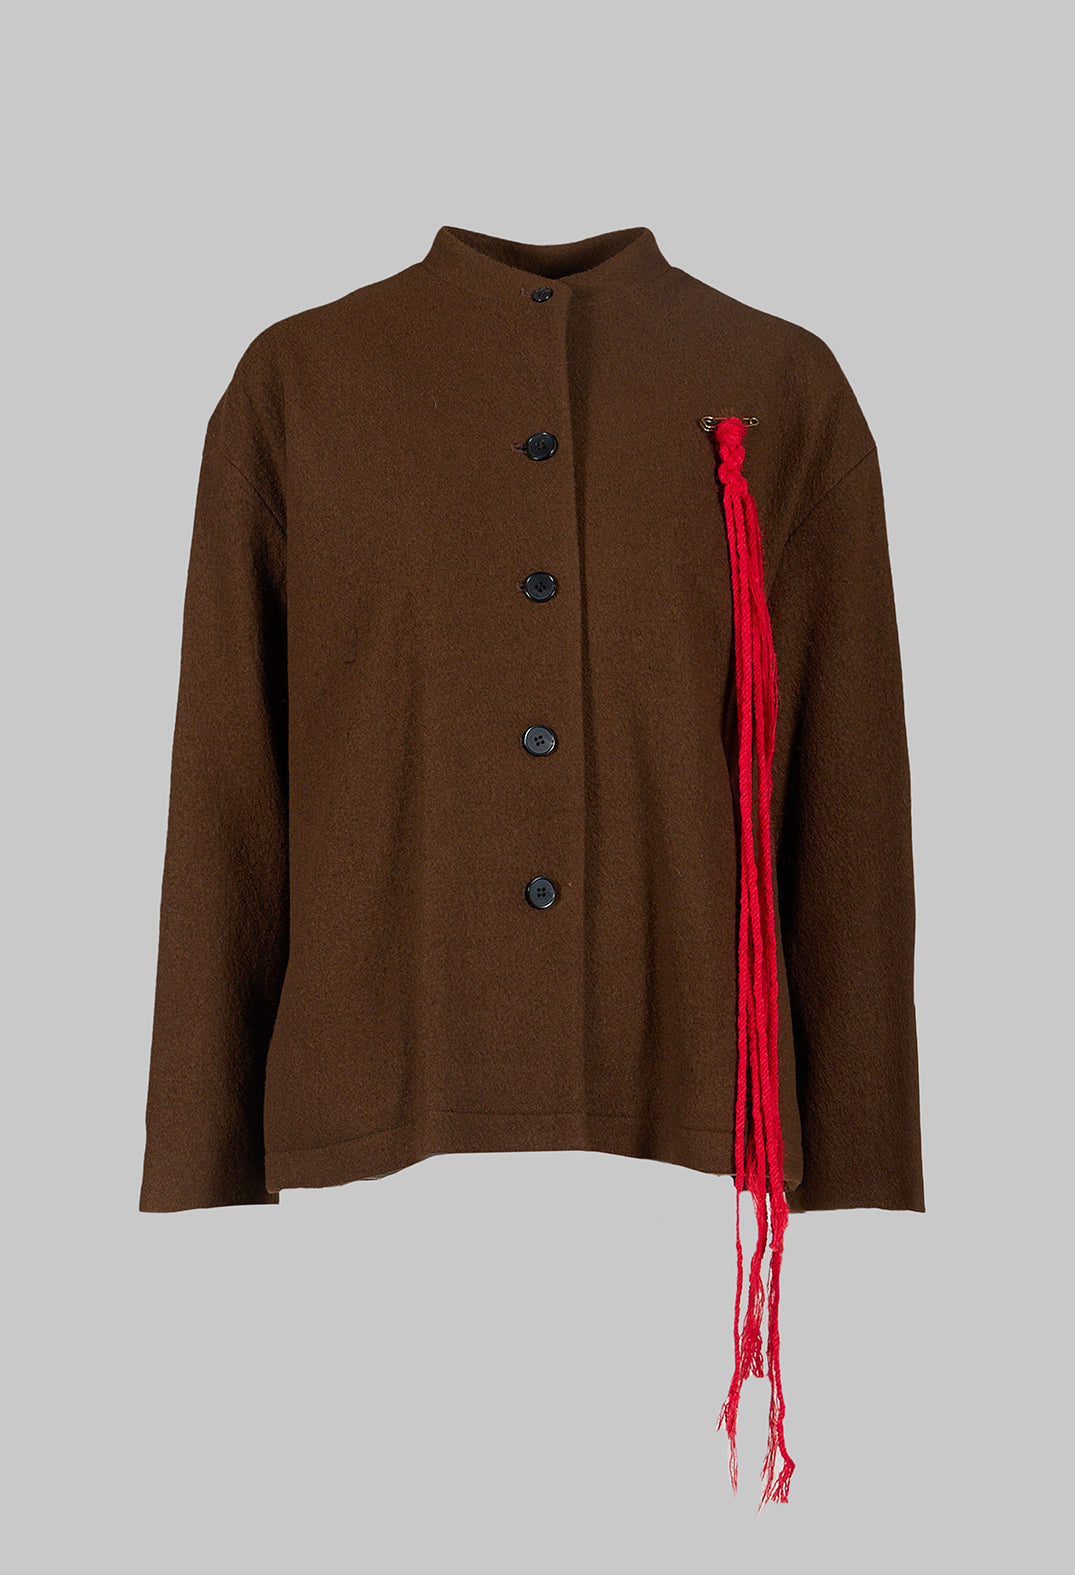 High Neck Jacket with Contrast Lining in Khaki